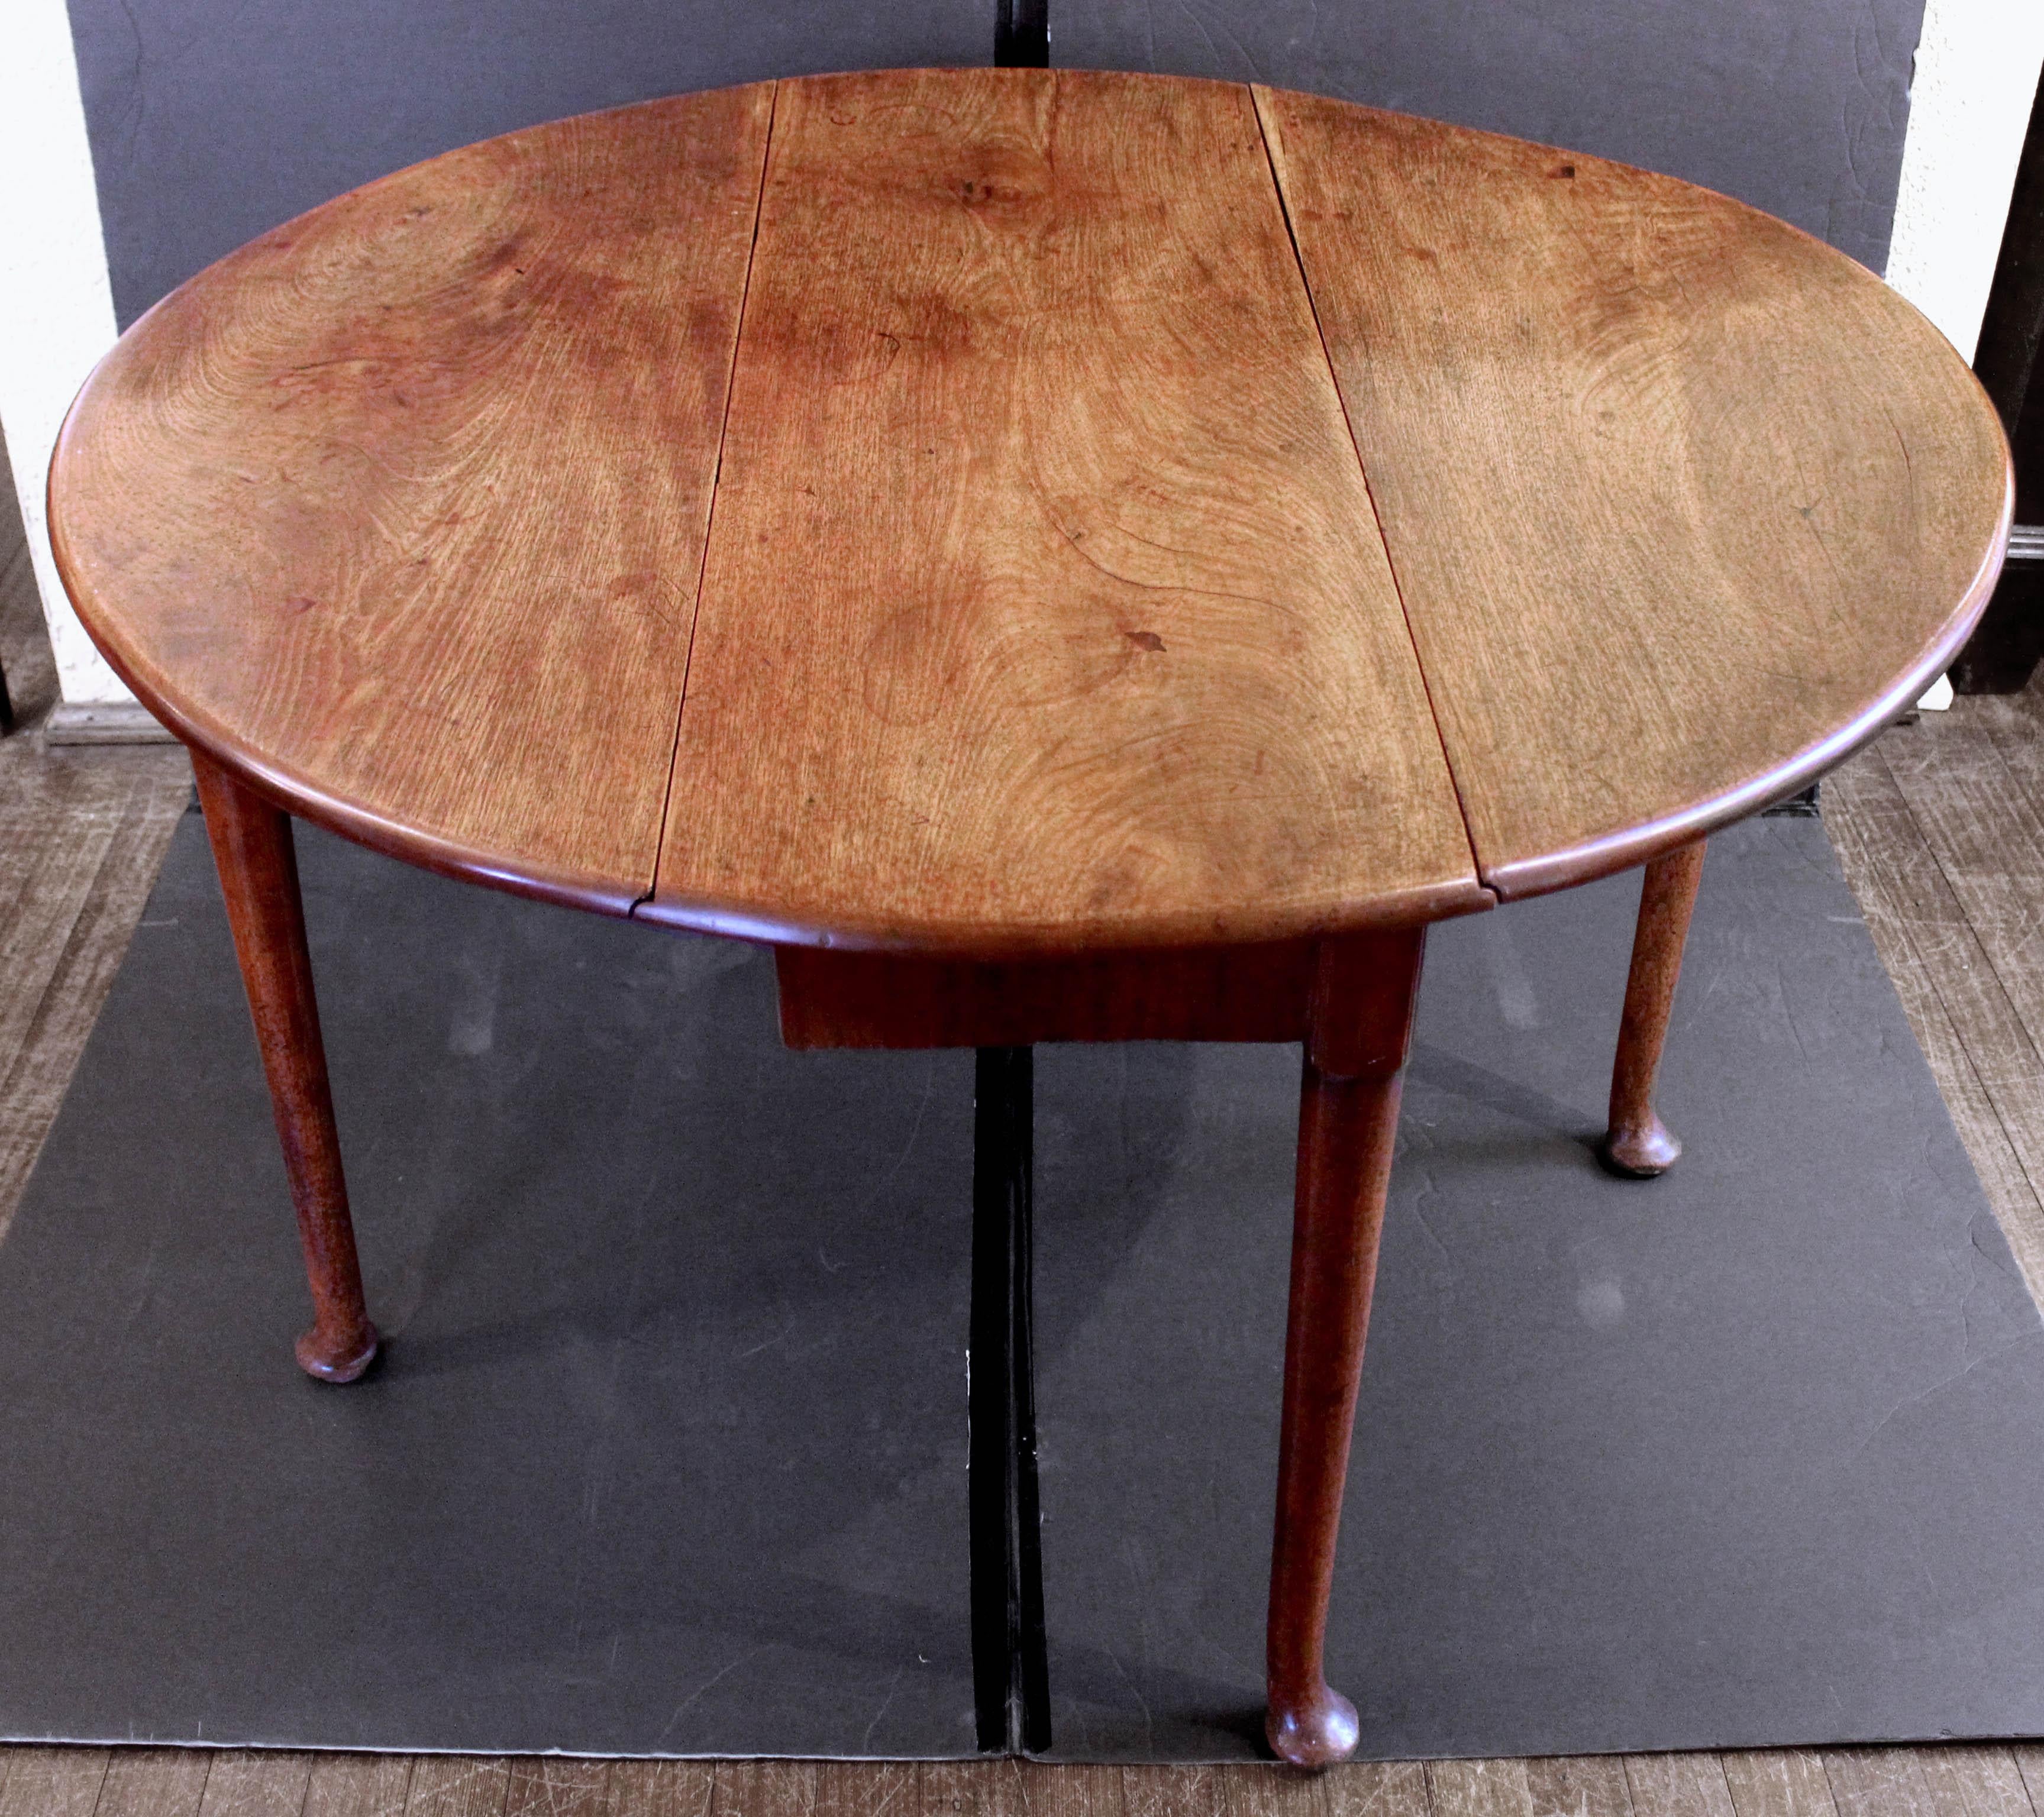 Circa 1750 George II Period Oval Drop Leaf Table, English In Good Condition For Sale In Chapel Hill, NC